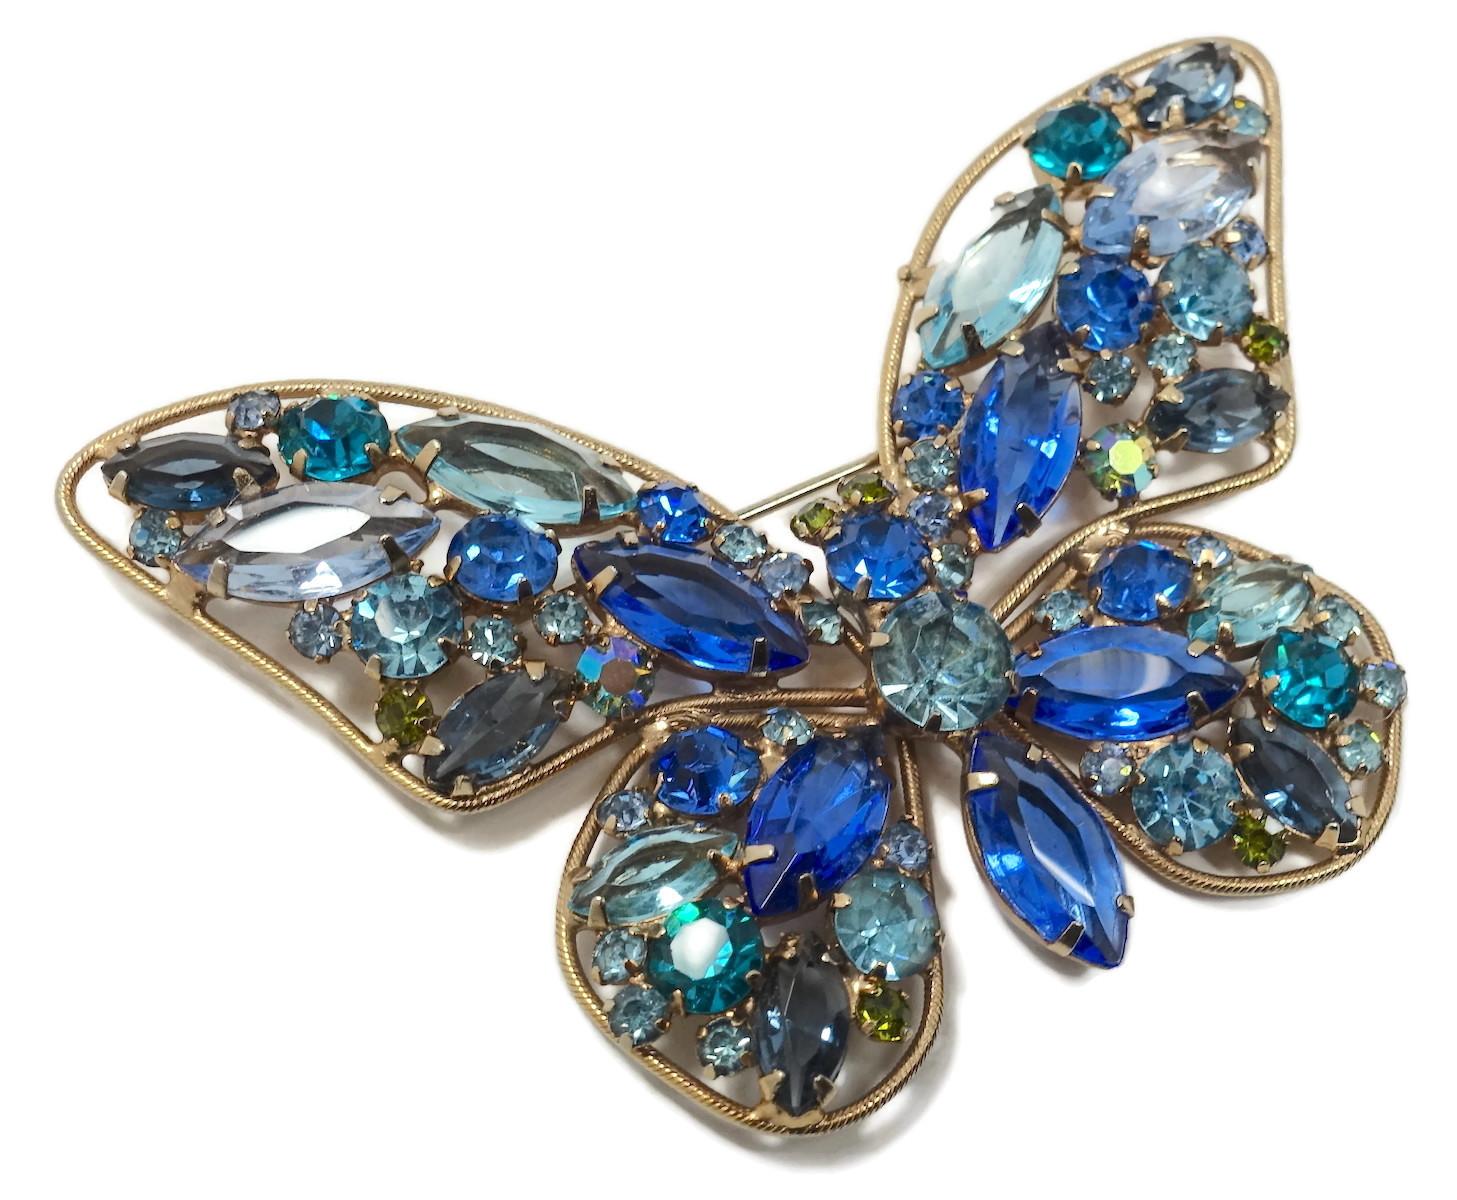 This vintage butterfly 1960s brooch reminds me of Weiss.  It features multi-color crystals in a gold tone setting.  In excellent condition, this brooch measures 3-1/4” x 2-1/8”.